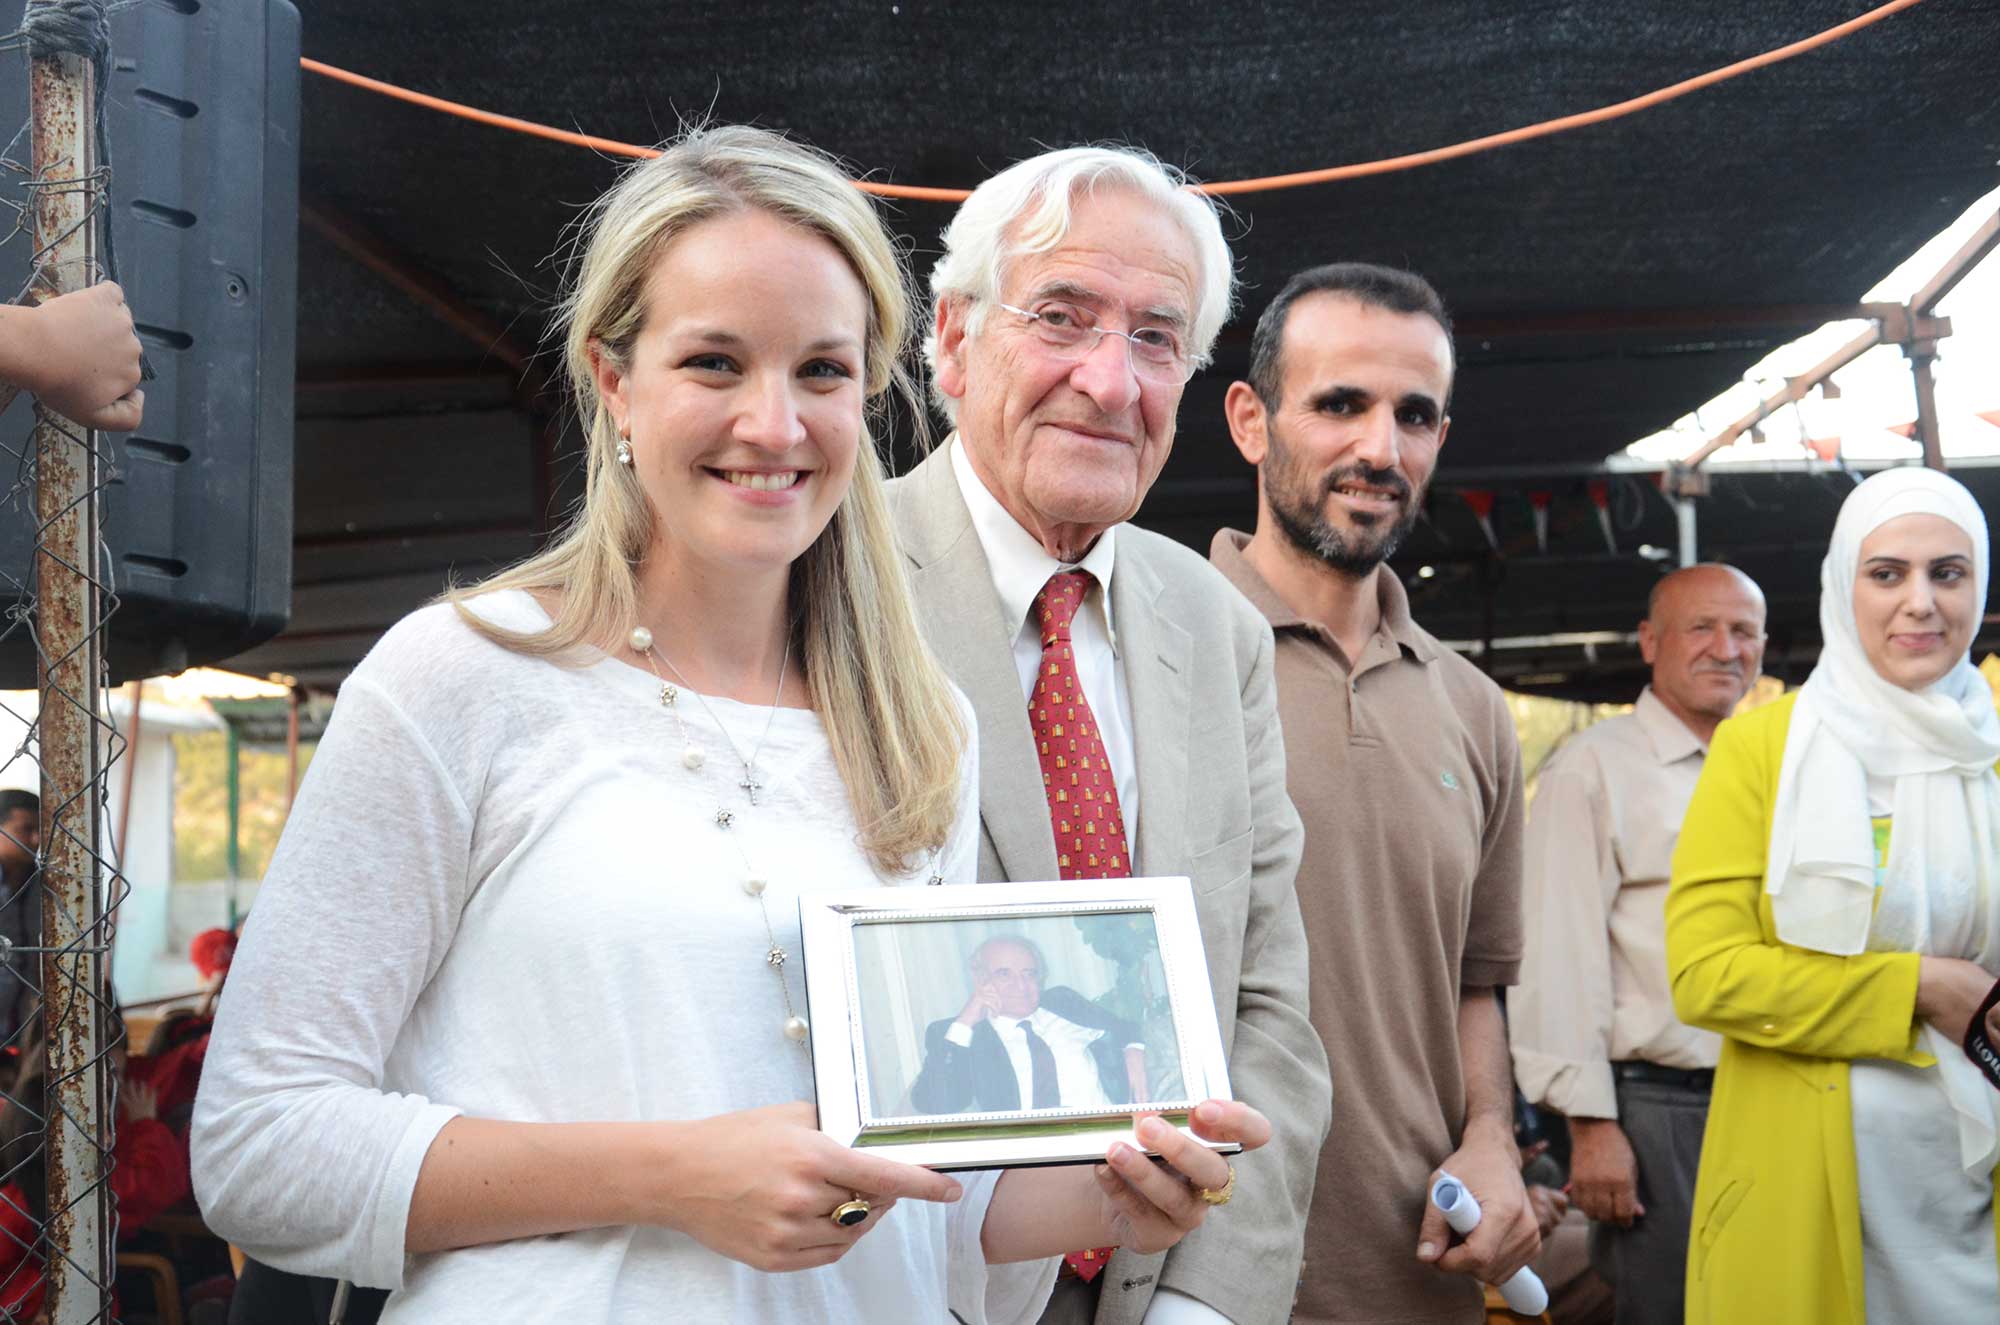 Charles and his daughter Fiona hold up a photo of Bahjat Tarazi, for whom the preschool is named.